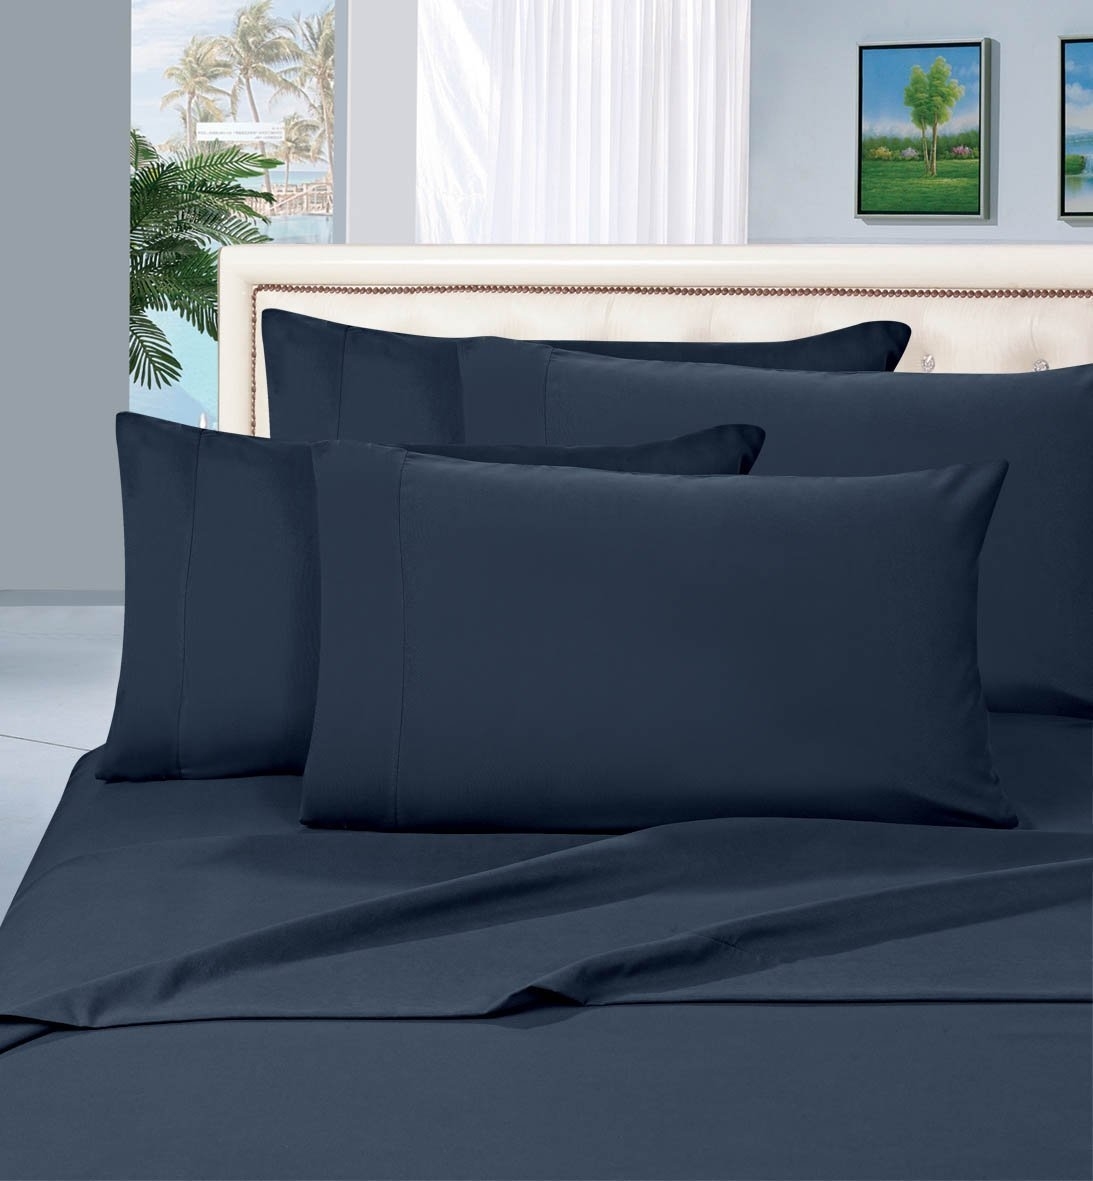 Elegant Comfort 1500 Series Wrinkle Resistant Egyptian Quality Hypoallergenic Ultra Soft Luxury 4-piece Bed Sheet Set, Queen, Navy Blue